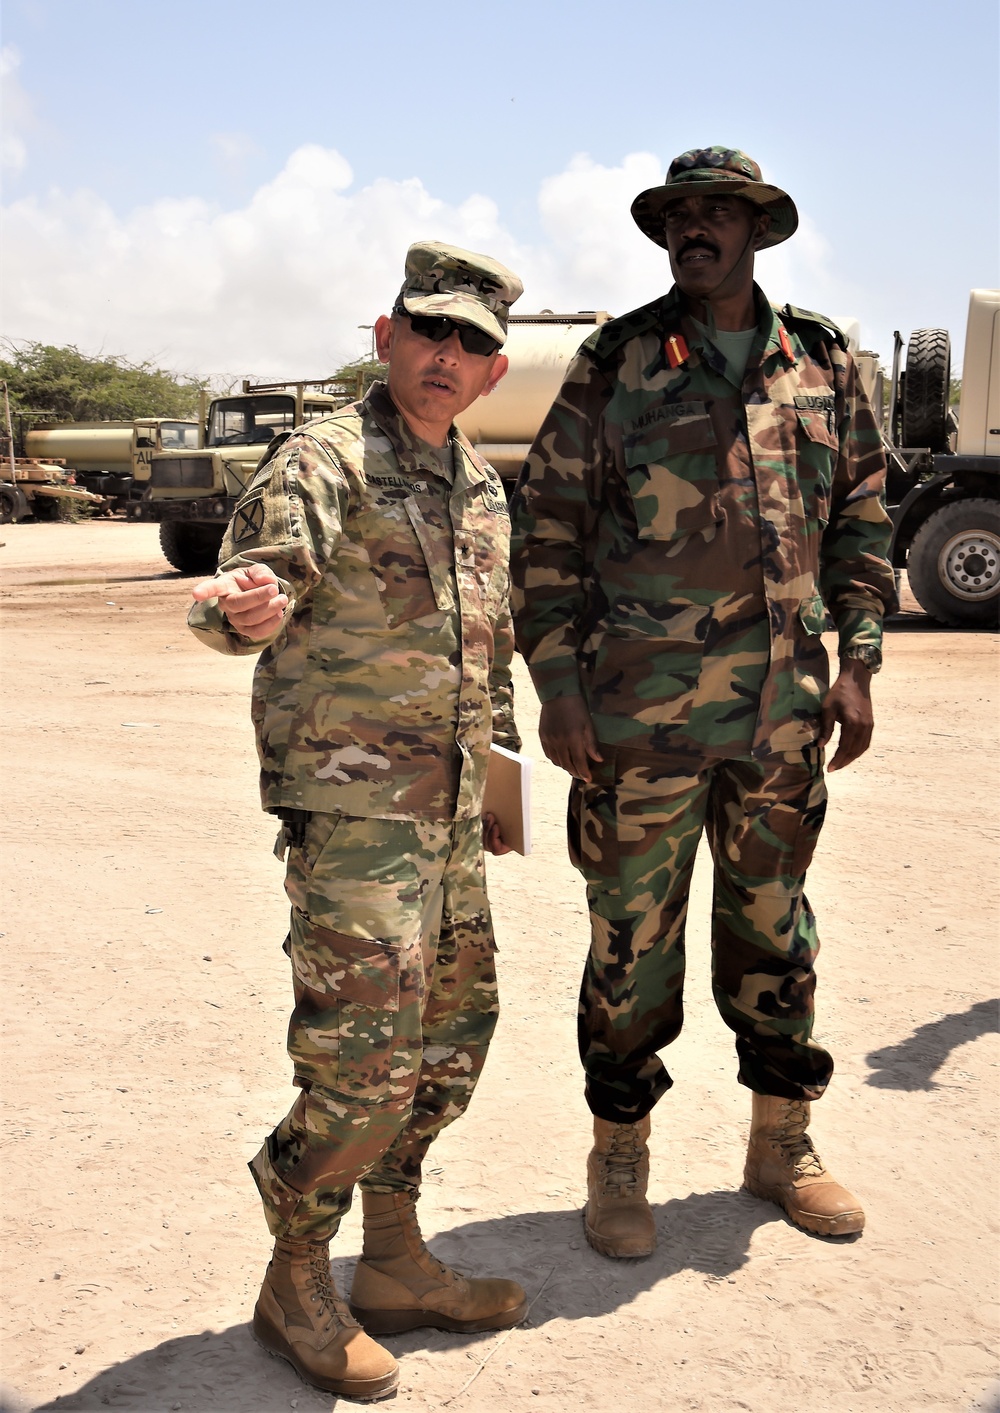 AMISOM strength bolstered with AFRICOM vehicle delivery to UPDF